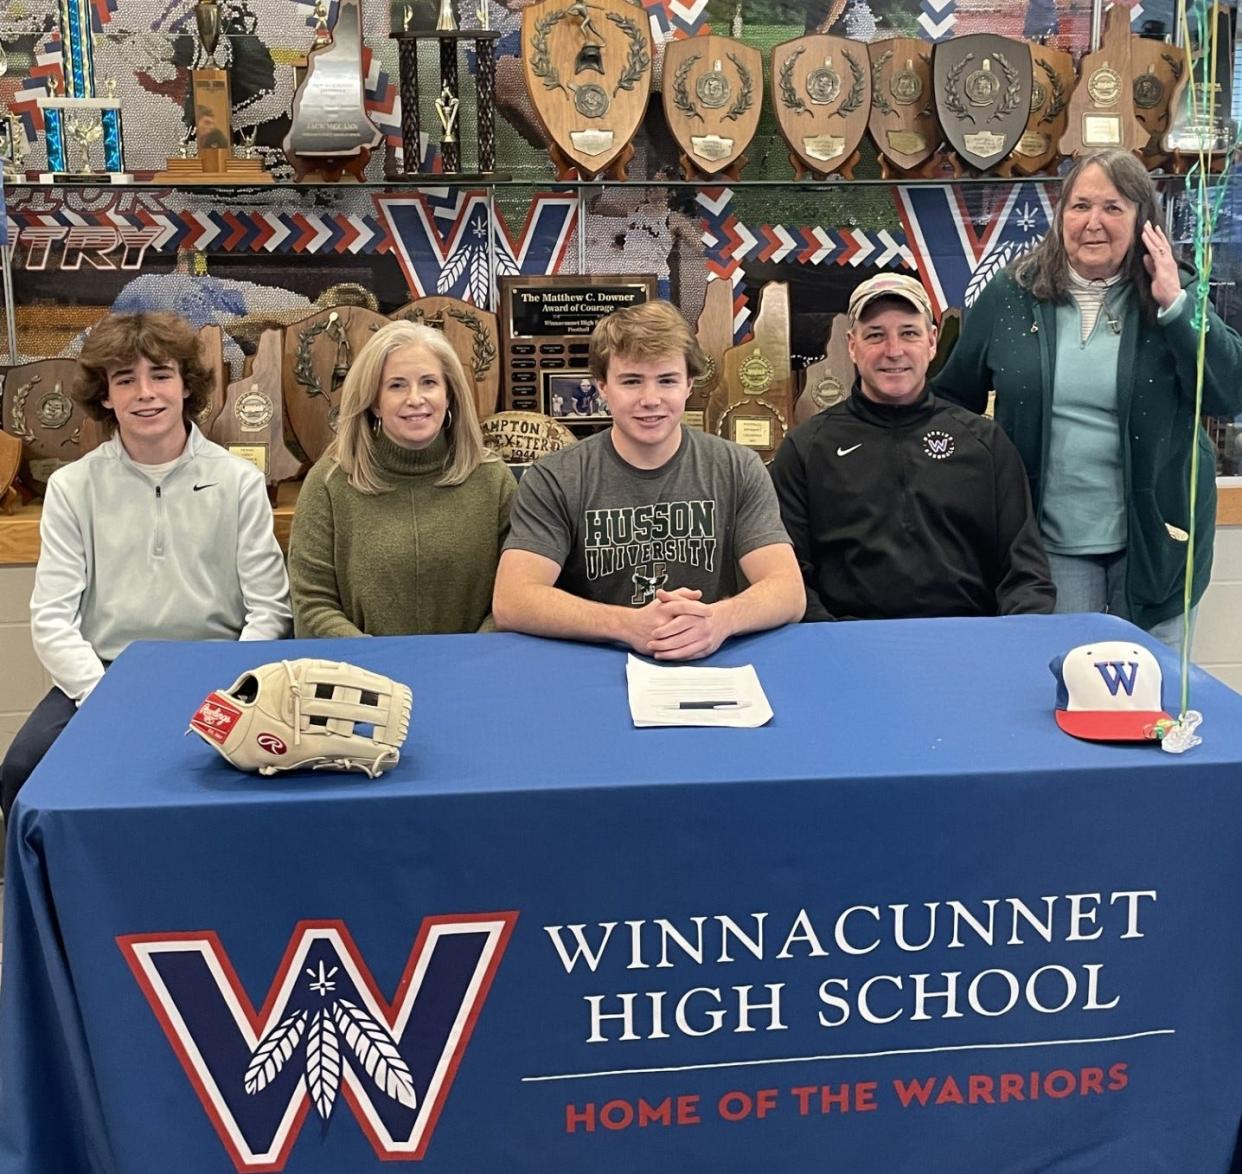 WInnacunnet High School senior Jackson Larck, center, recently announced his commitment to play baseball at Husson University. Larck his joined by his brother, Brantson; his parents, Kim and Jamie; and grandmother, Linda Larck.